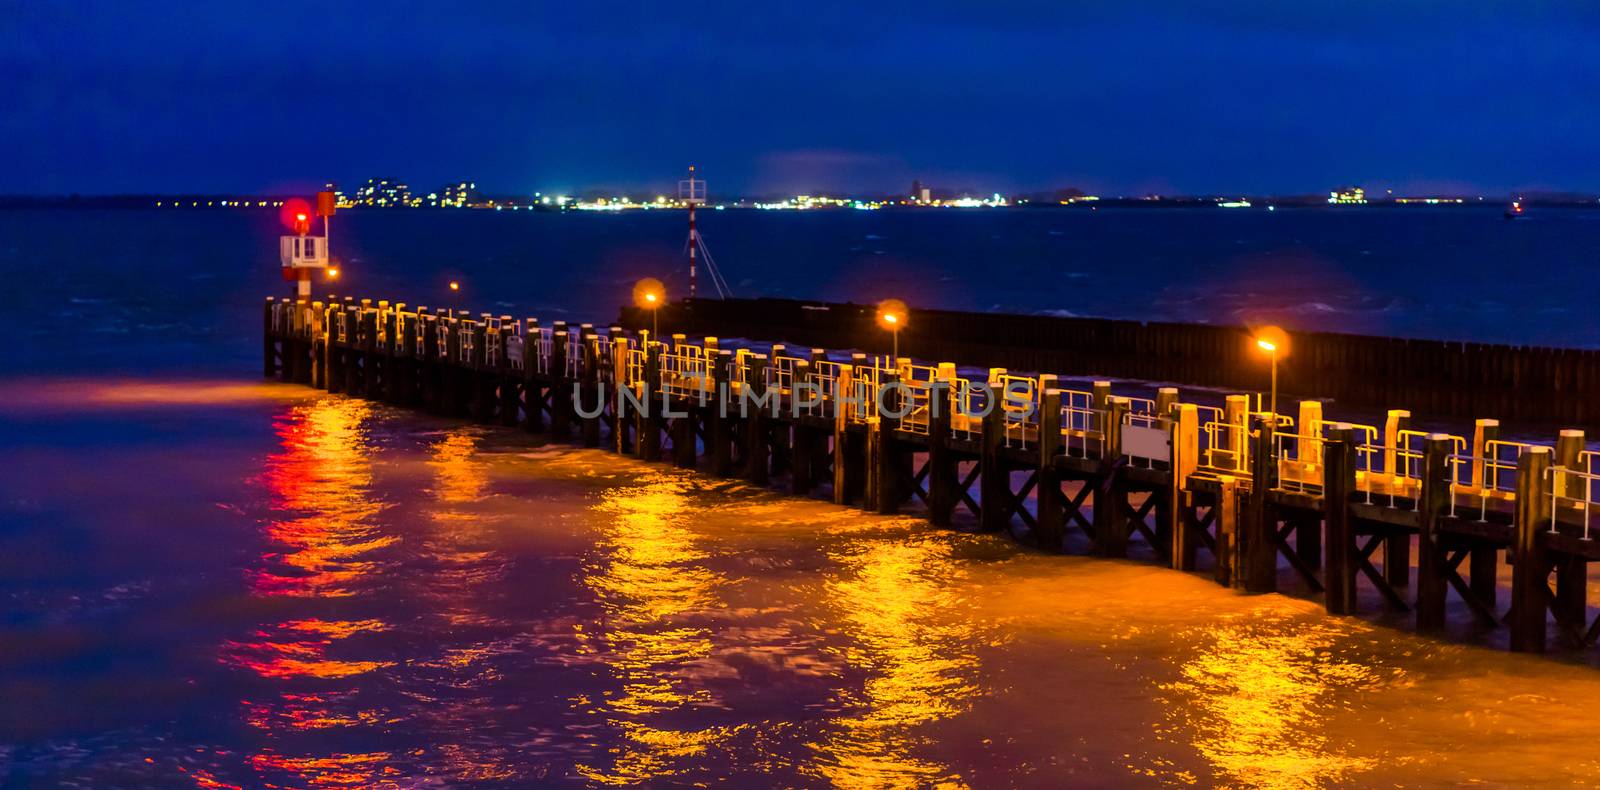 The pier jetty of vlissingen illuminated at night, lights reflecting in the ocean, Zeeland, the netherlands